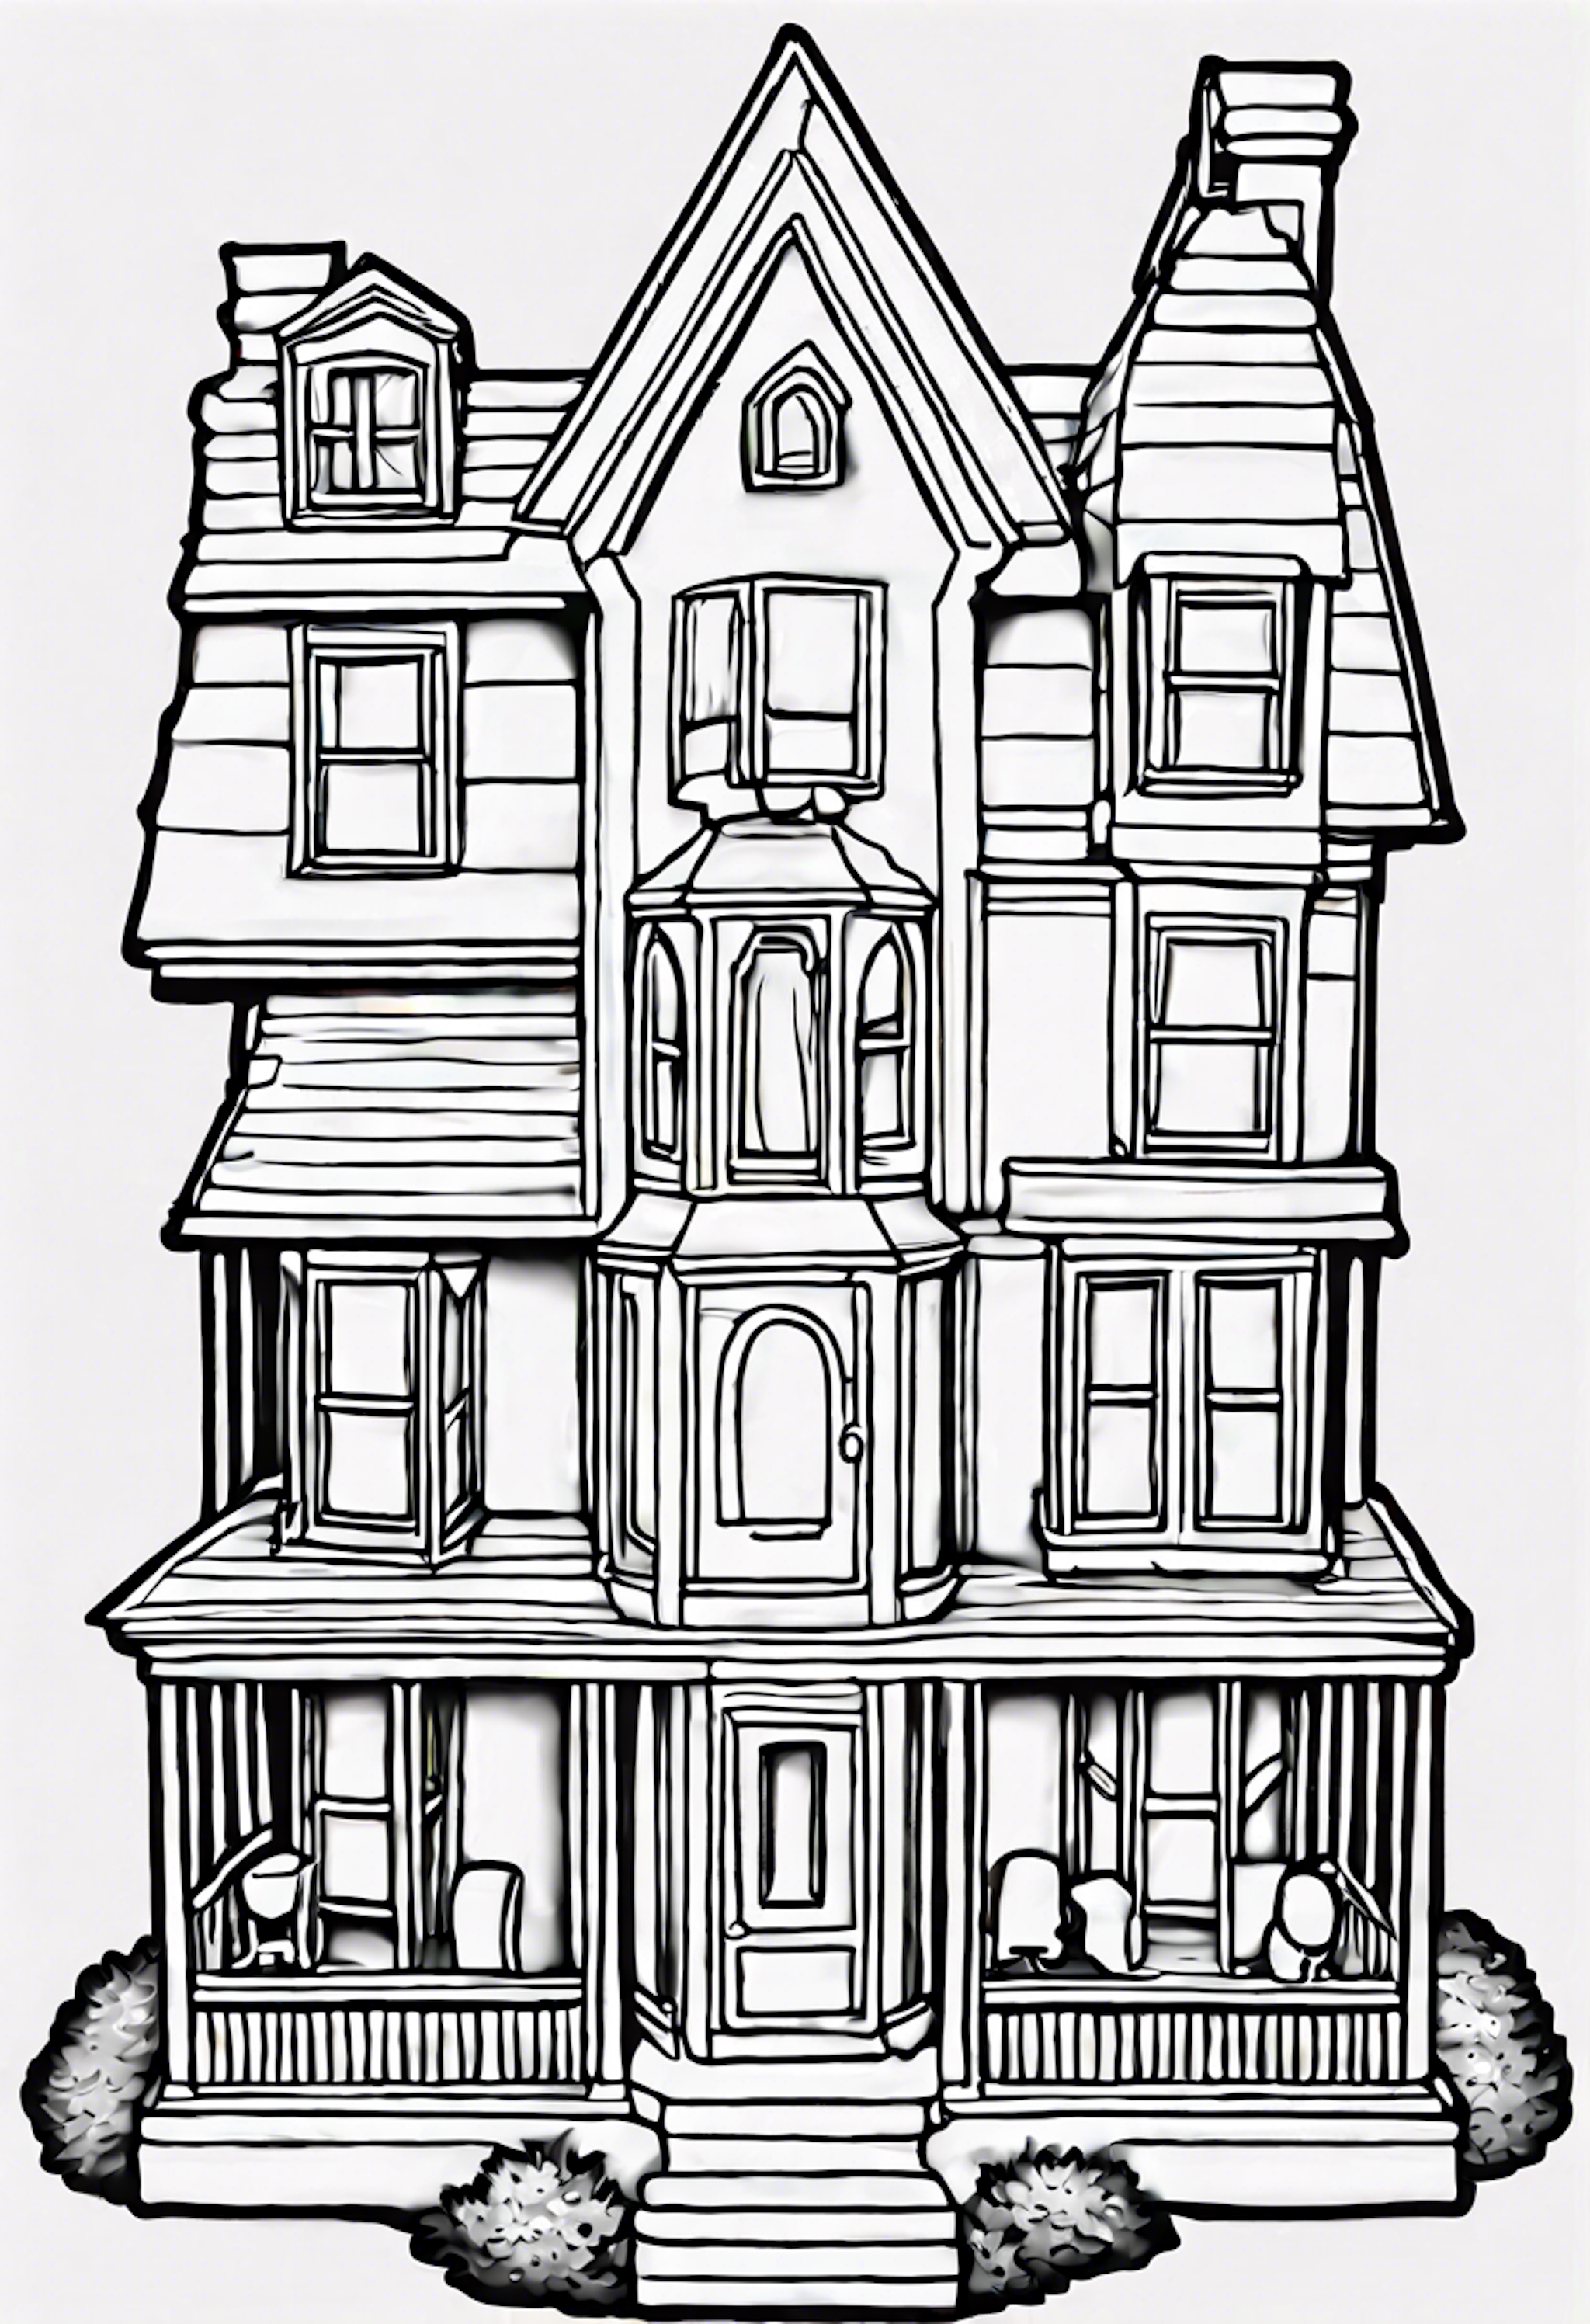 A coloring page for 1 Gabby's Dollhouse coloring pages